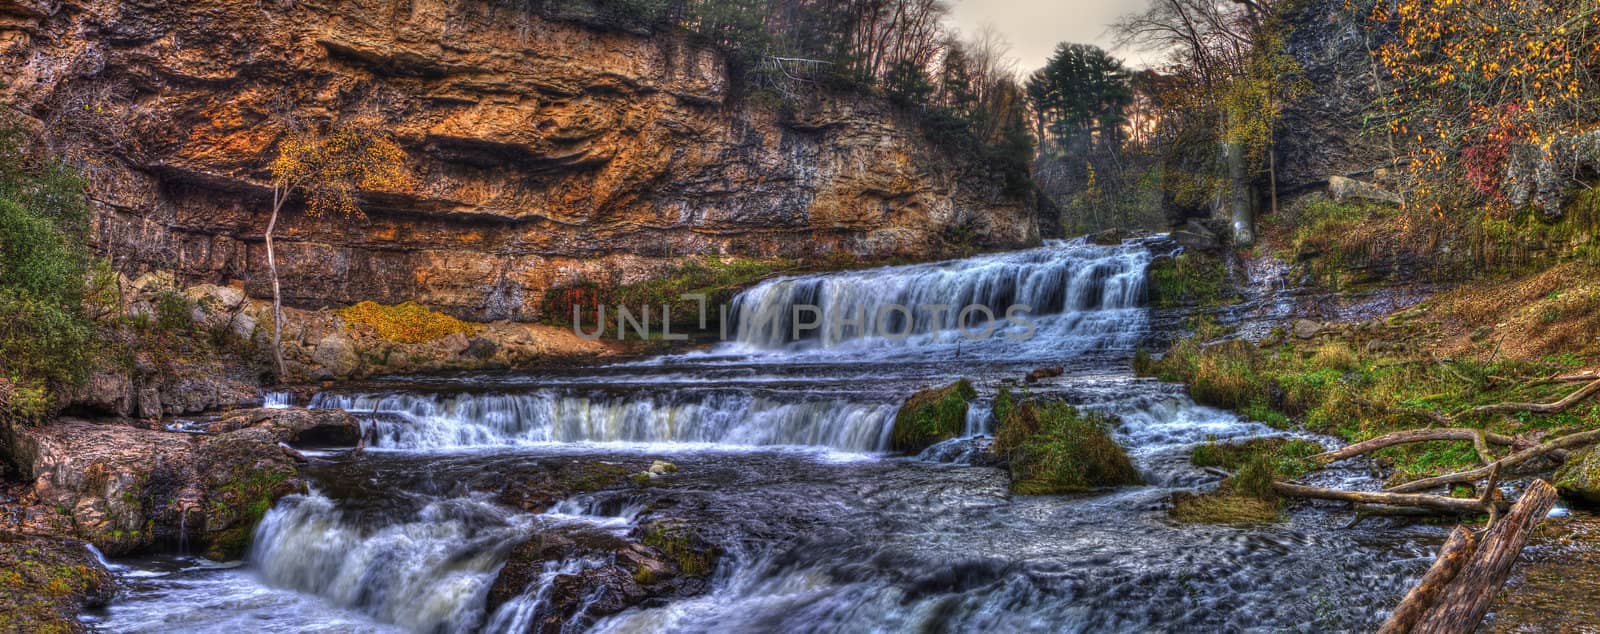 Waterfall in hdr by Coffee999